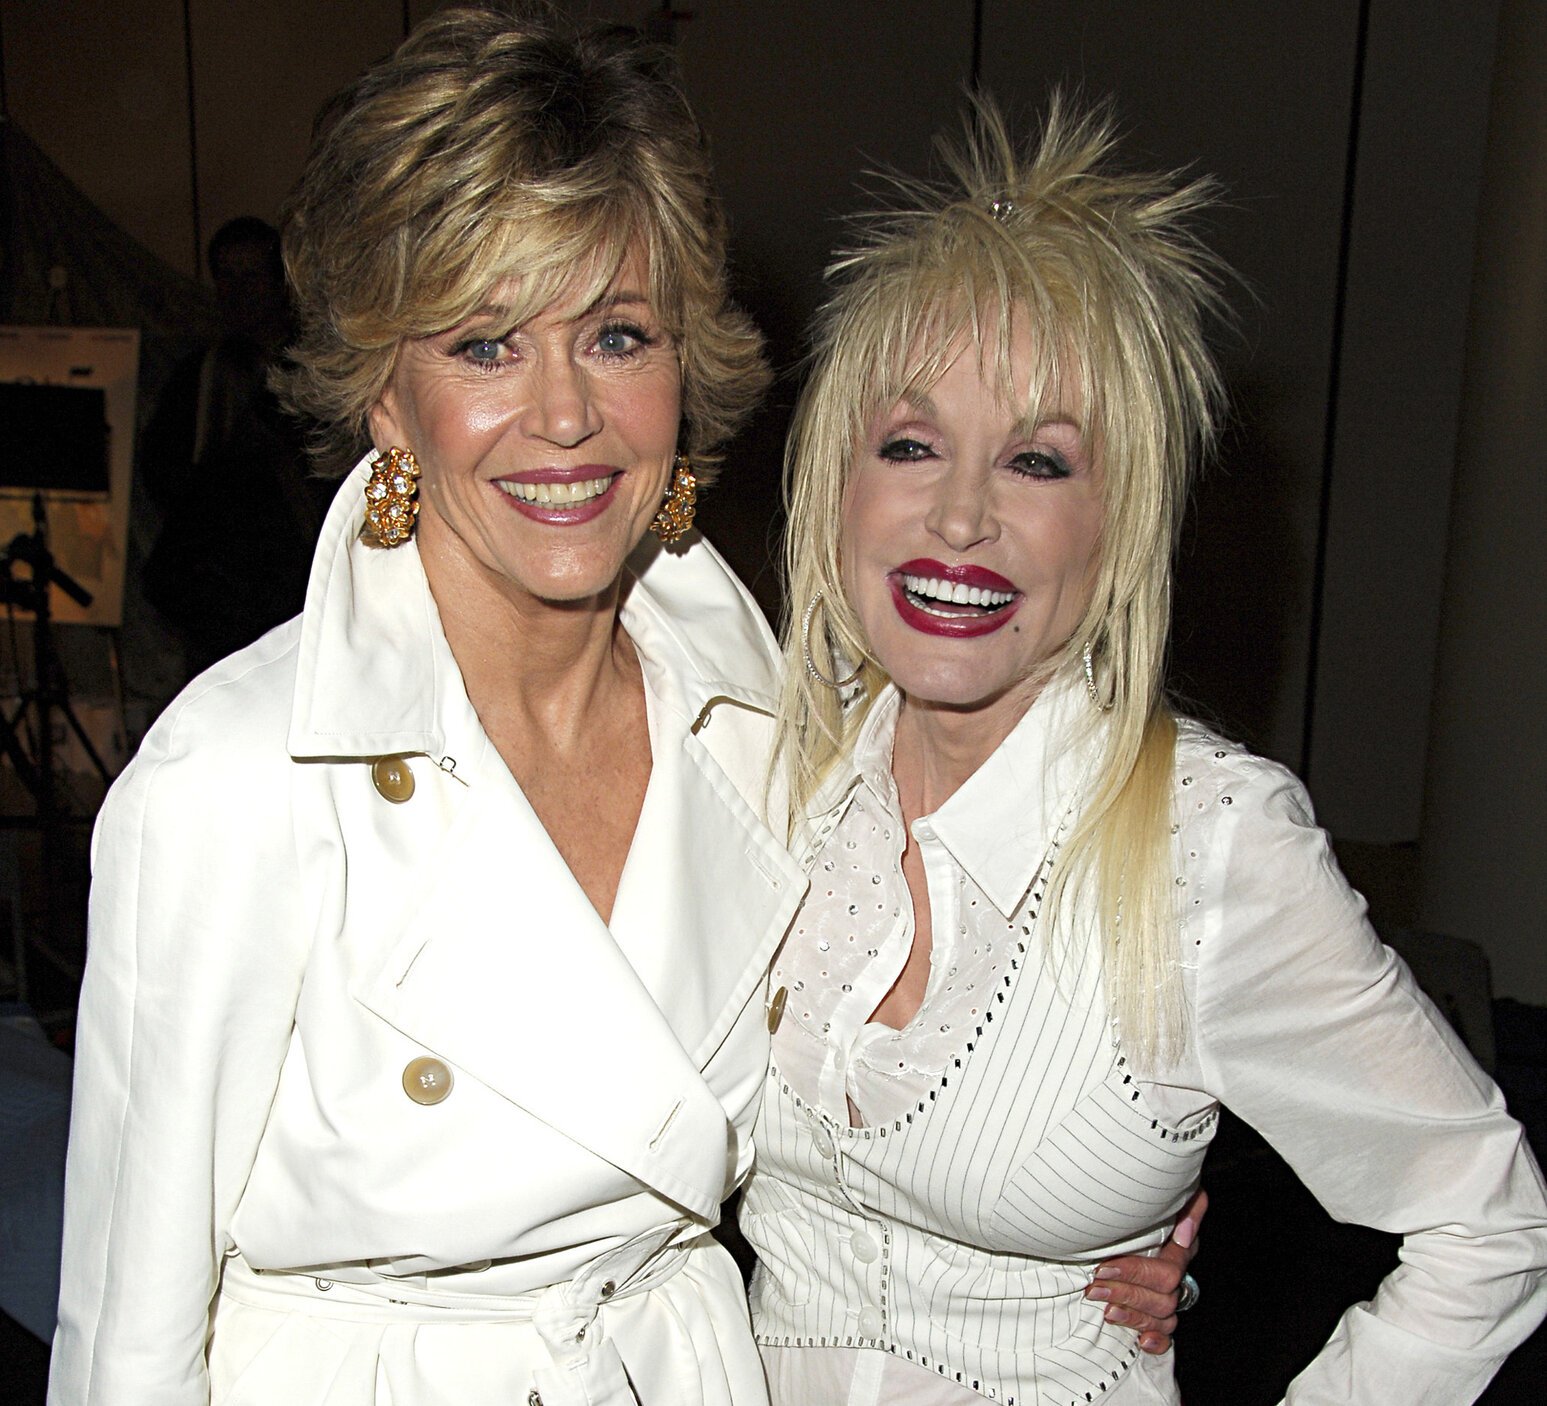 Jane Fonda and Dolly Parton pose next to each other for the '9 to 5's 25th anniversary.